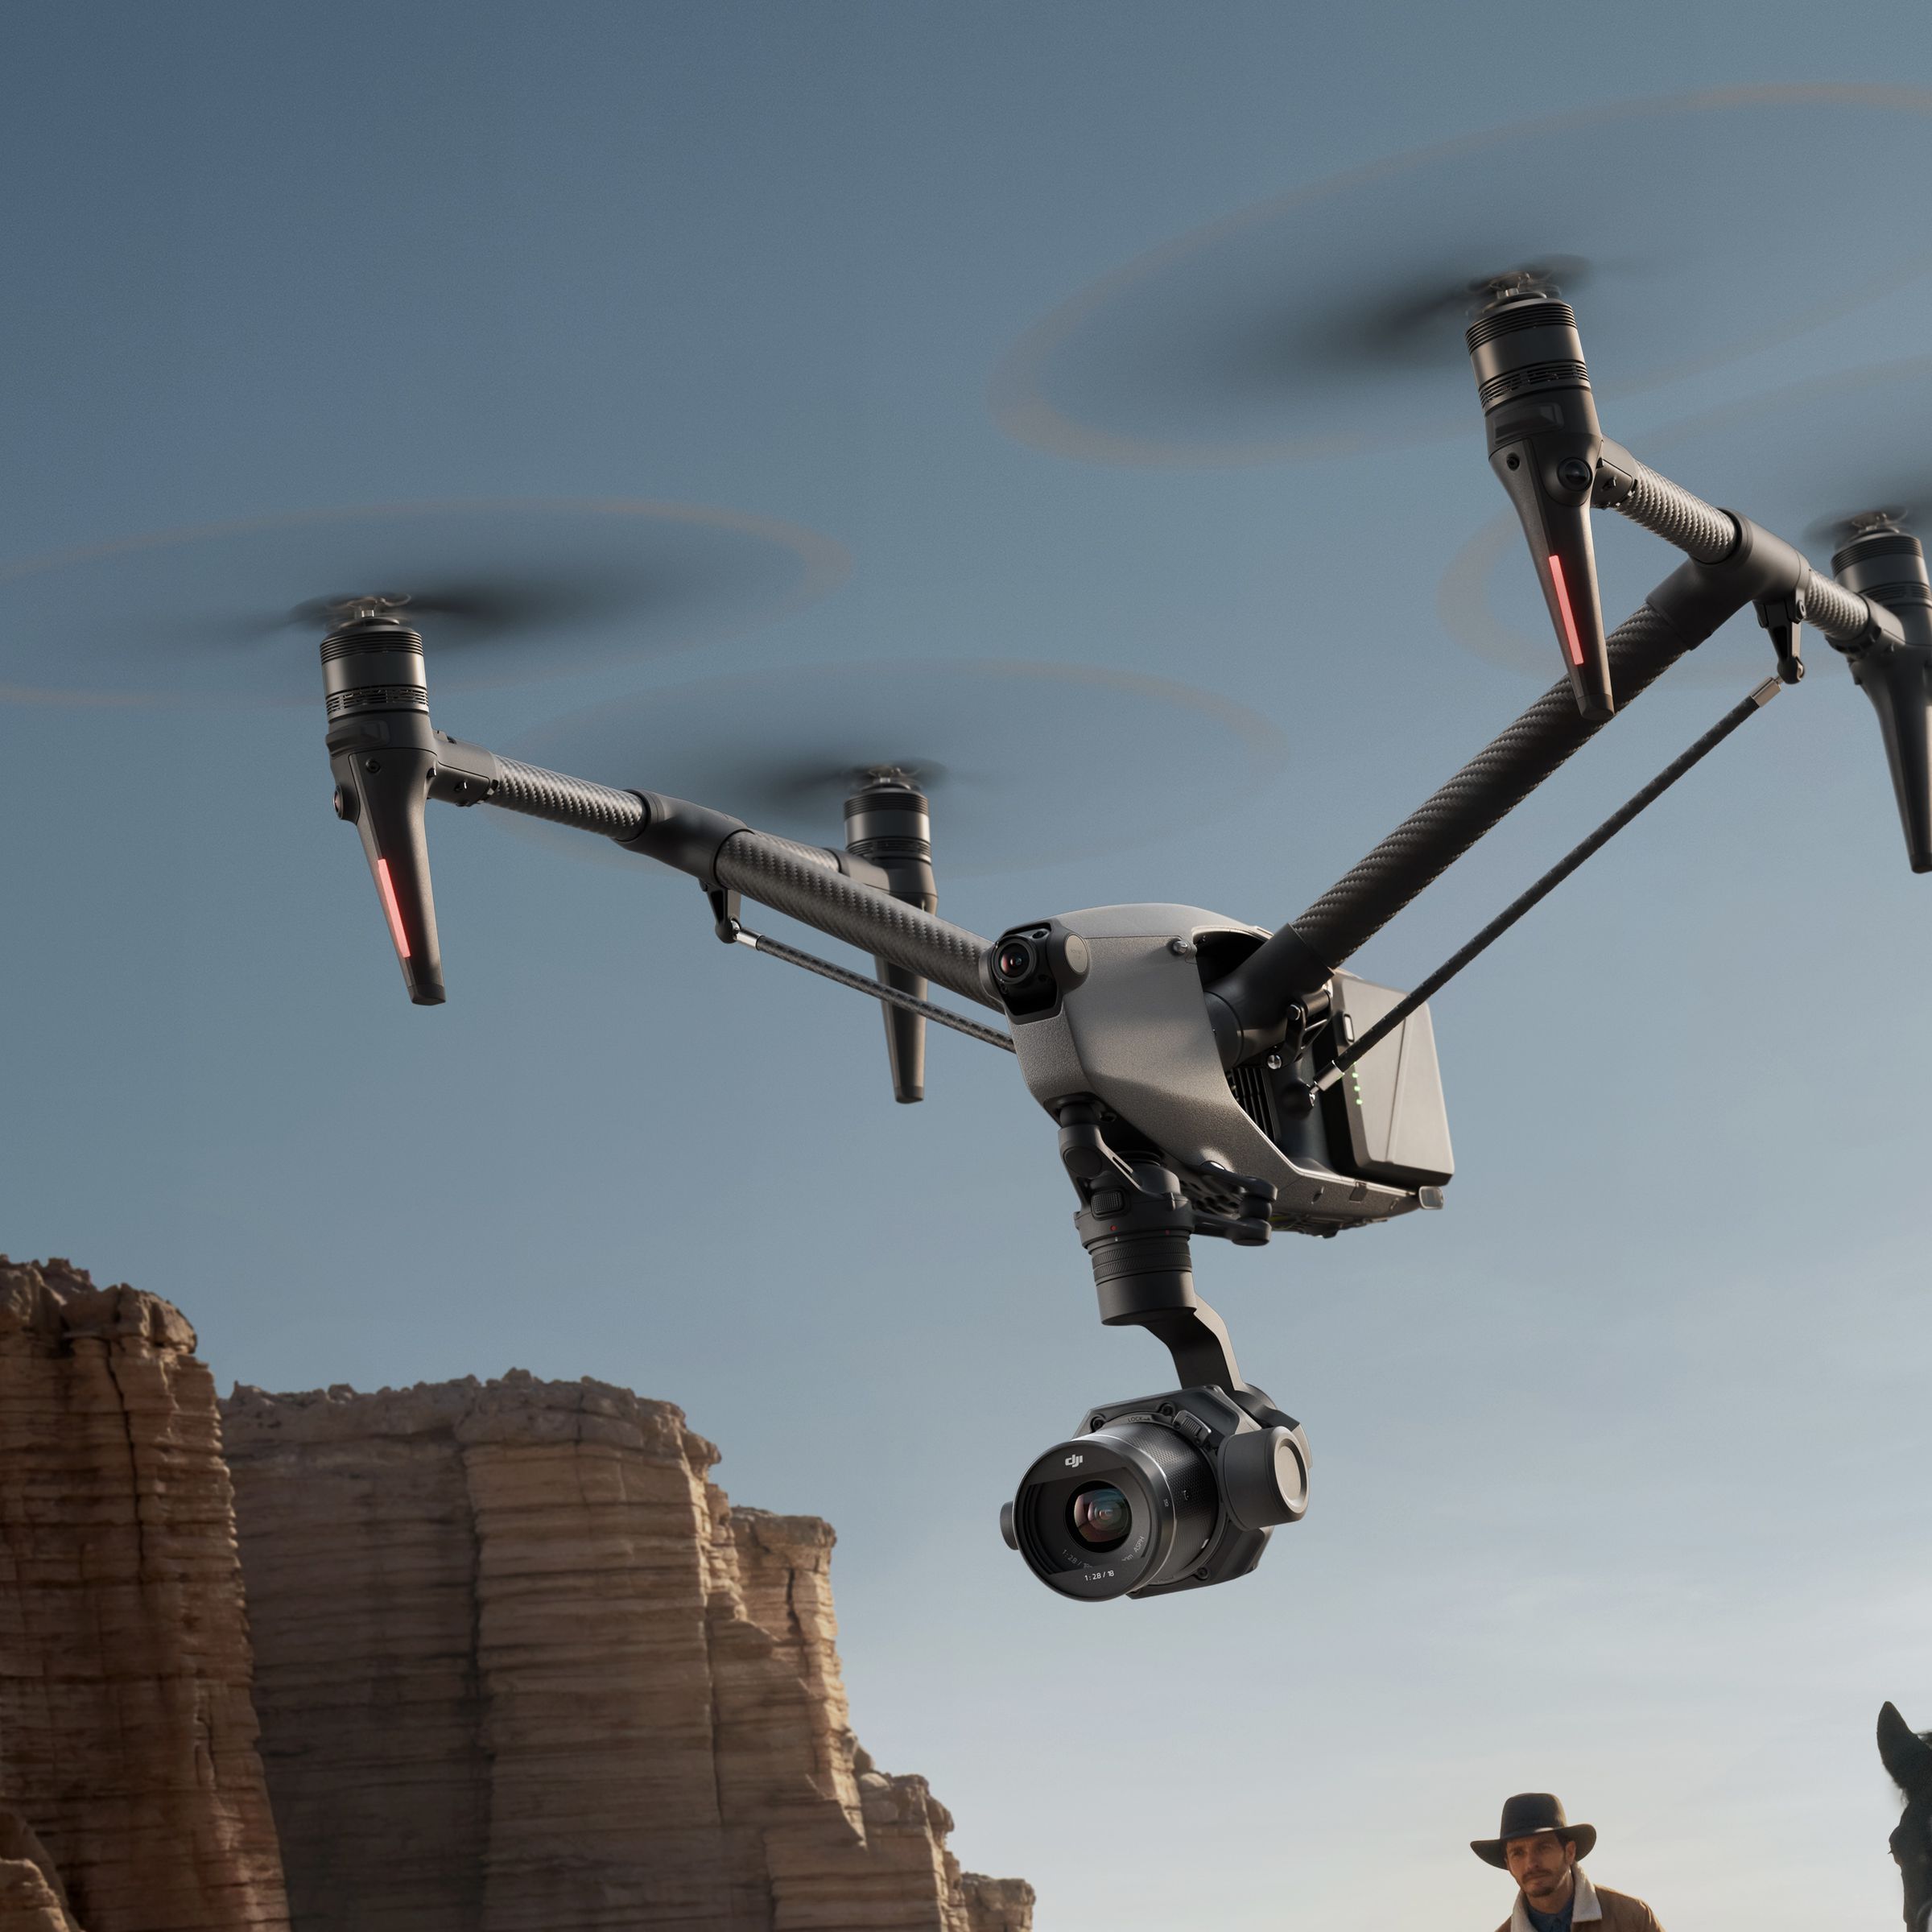 Inspire 3 drone flying low with cowboys on horses following it and cliffs in the background